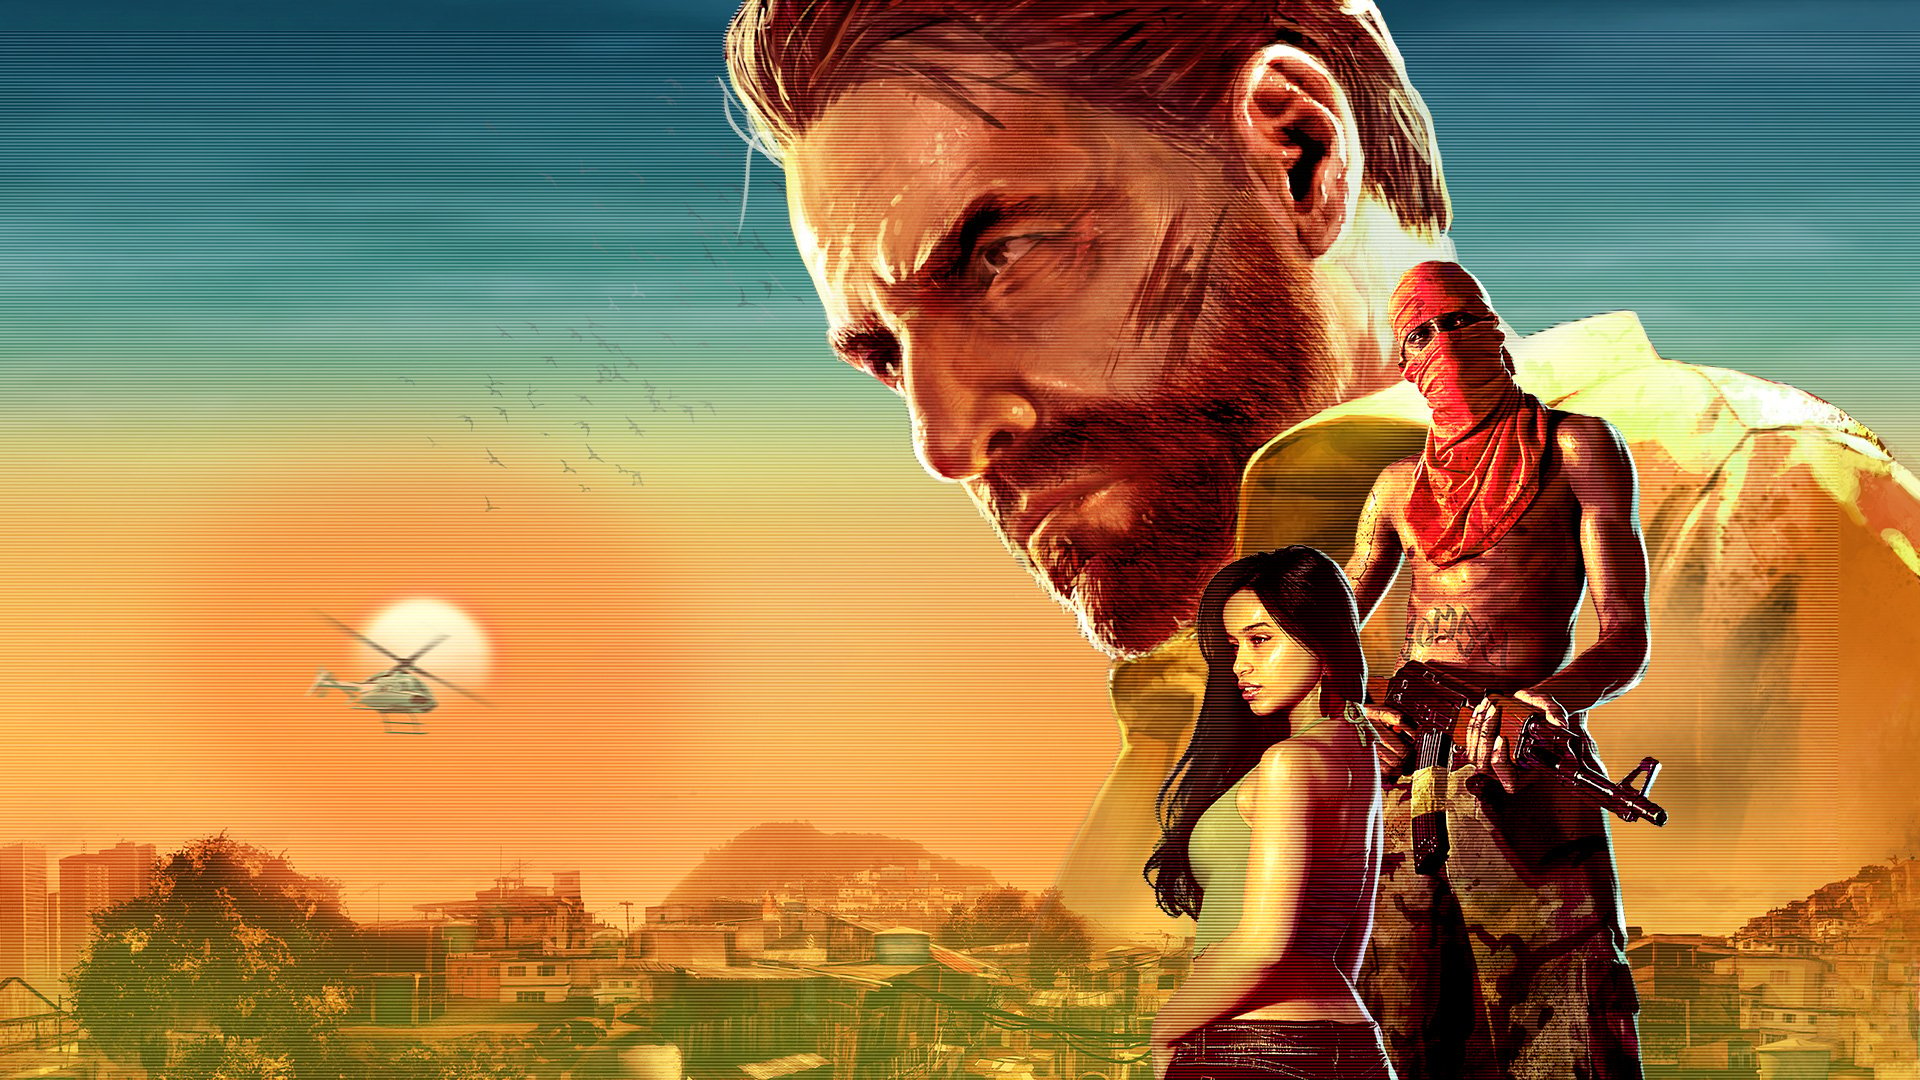 Max Payne 3' and 'Spec Ops: The Line' sales lowlights of $110 million loss  for Take-Two - Polygon